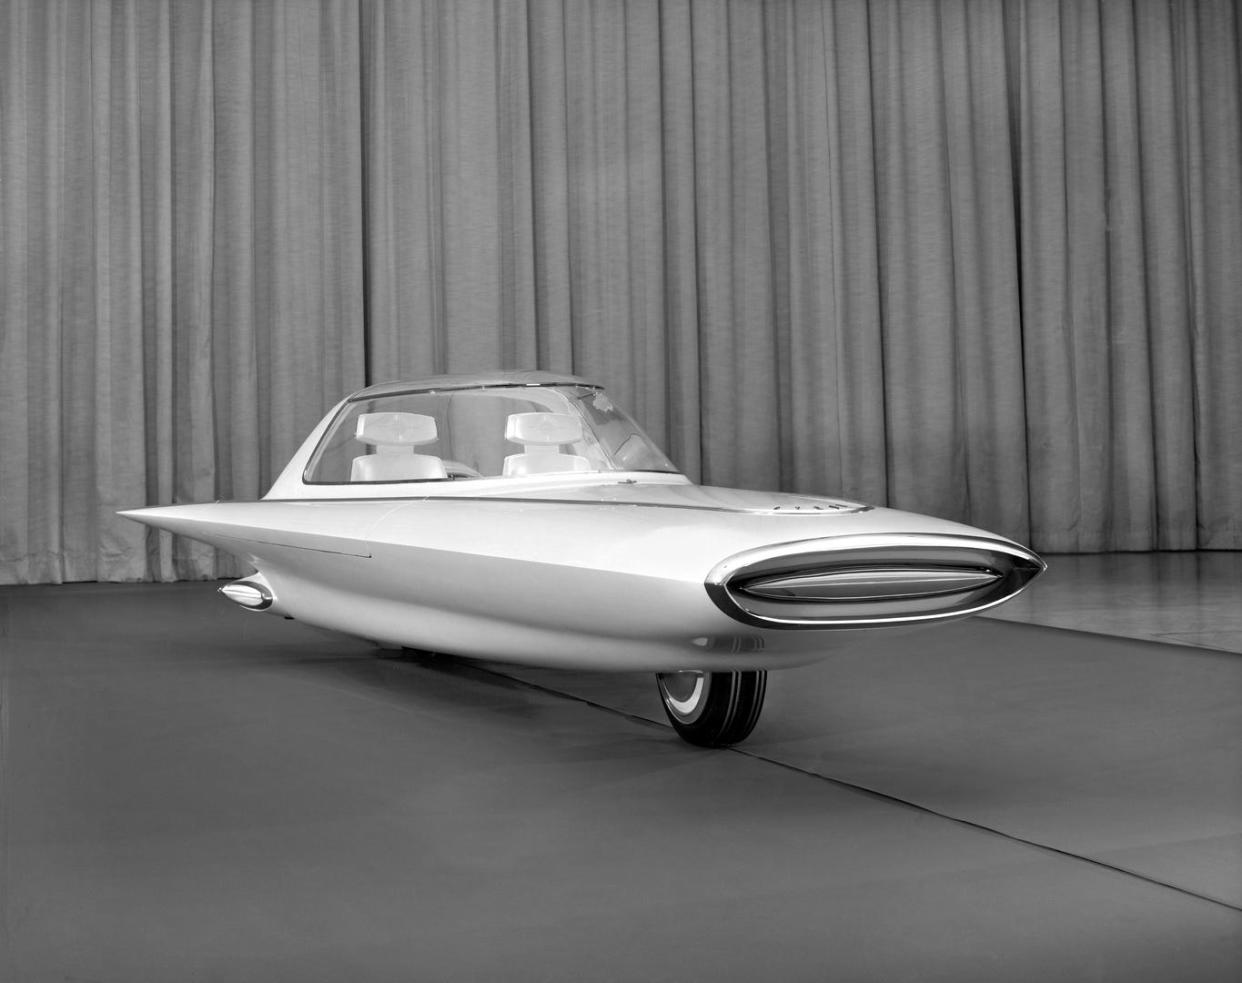 This 1961 Ford Gyron, which reminds some auto enthusiasts of "The Jetsons" cartoon that aired in 1962-63, is among 100 concept vehicle images that Ford Motor Co. just added to its online archive site. Images are now available to the public for free downloading.